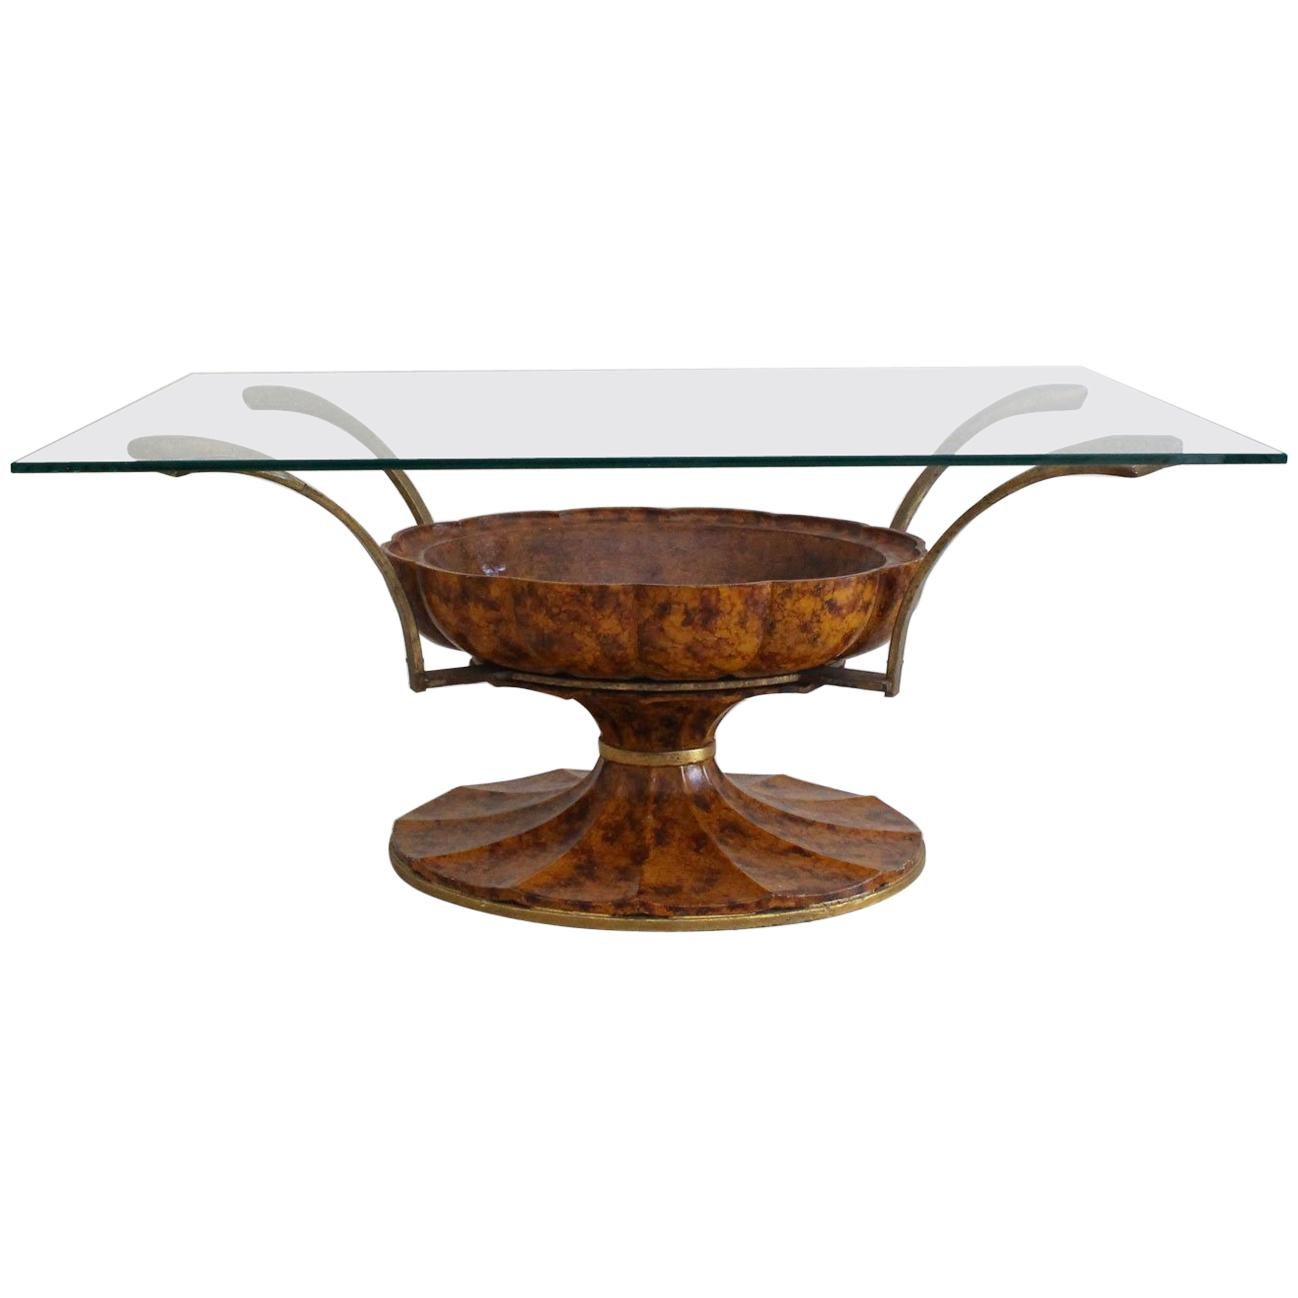 1930s Faux Tortoiseshell Italian Coffee Table with Glass Top